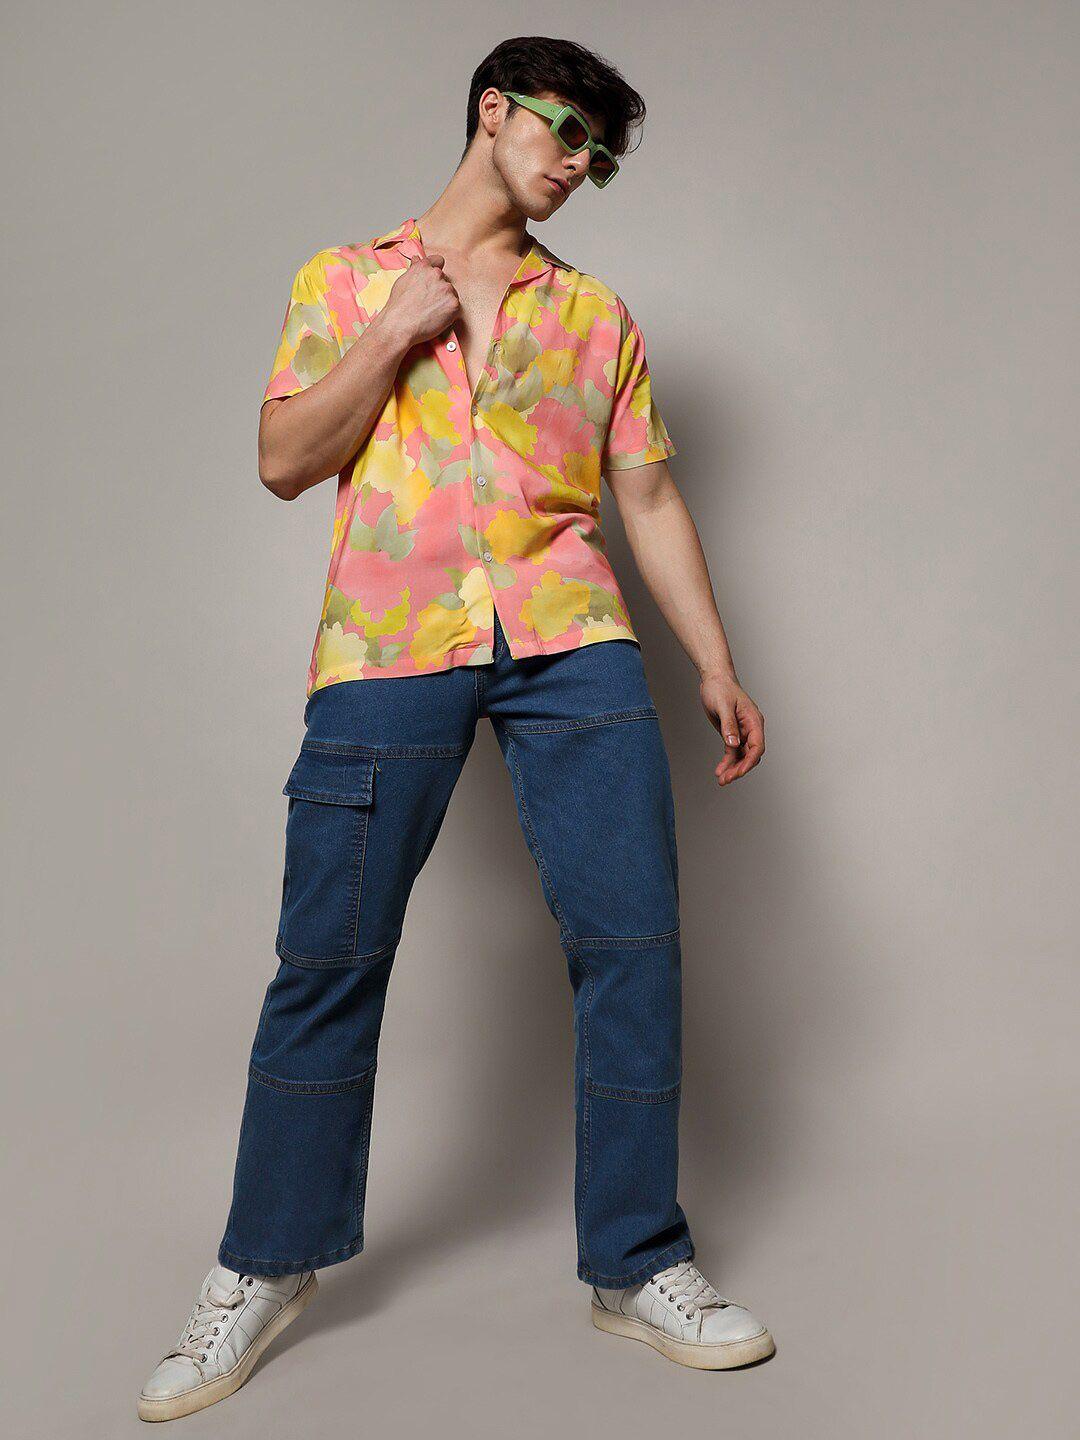 campus sutra peach & yellow classic abstract printed cuban collar casual shirt